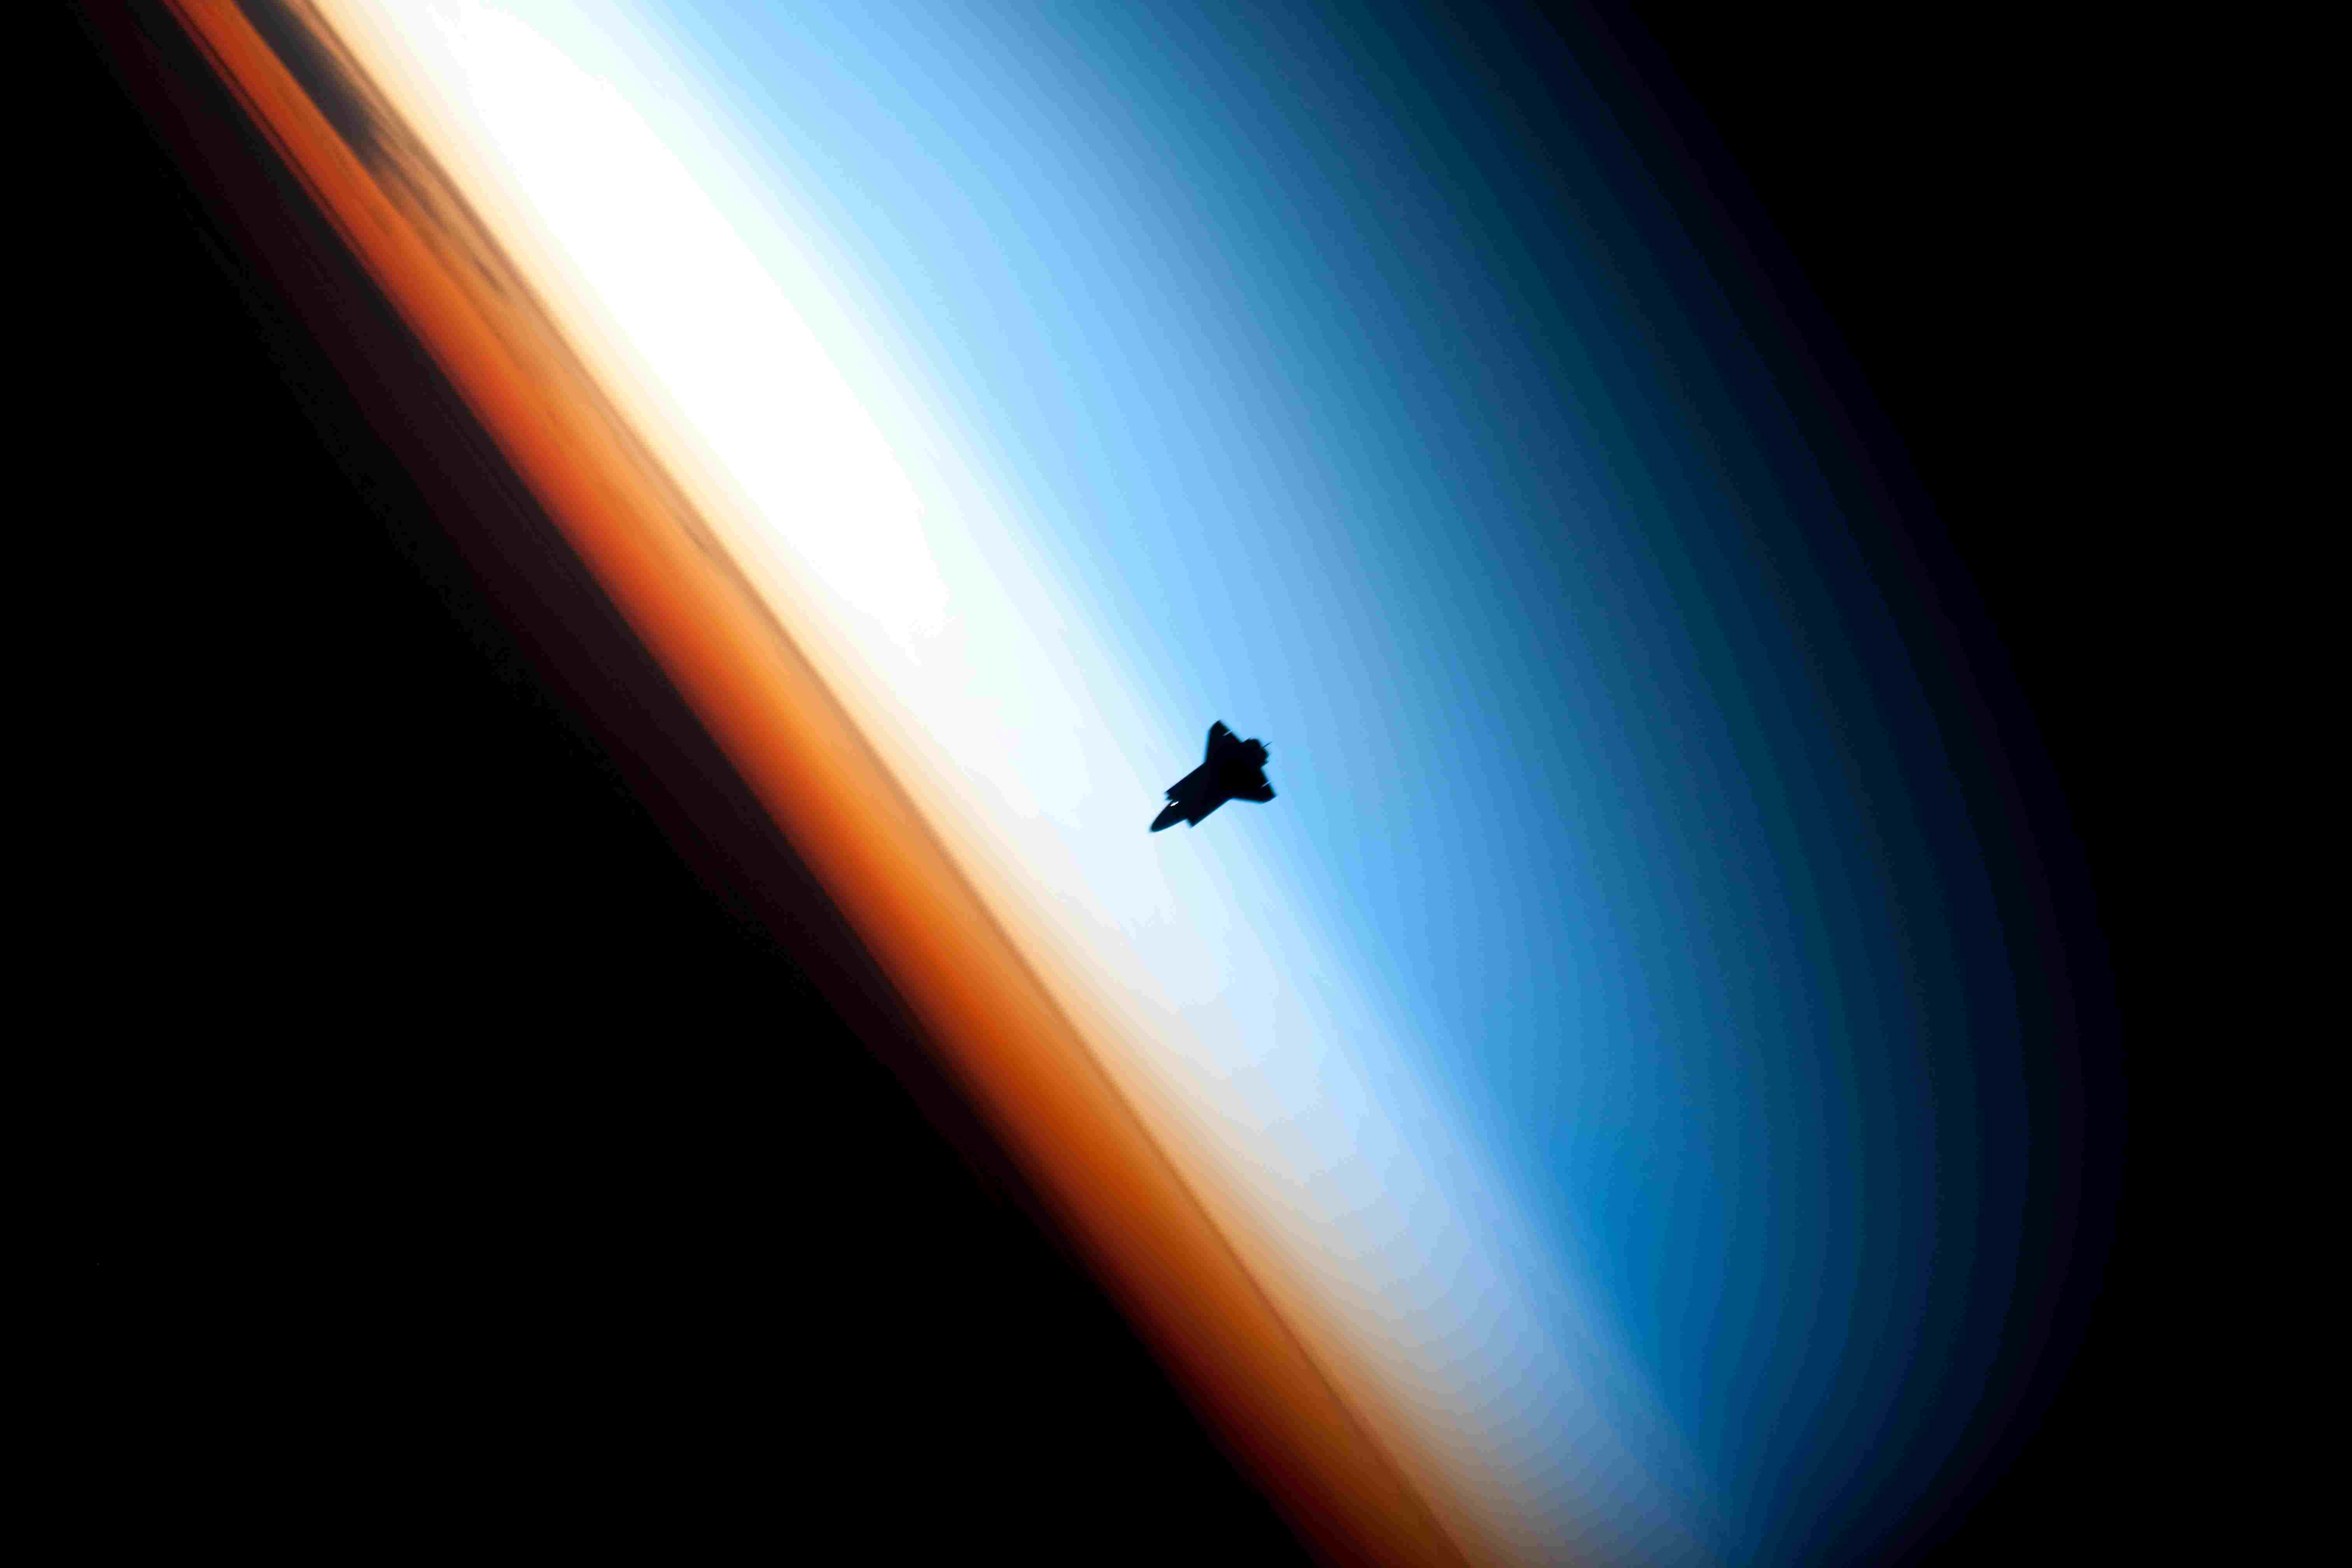 Images Wikimedia Commons/16 NASA Endeavour_silhouette_STS-130jpg